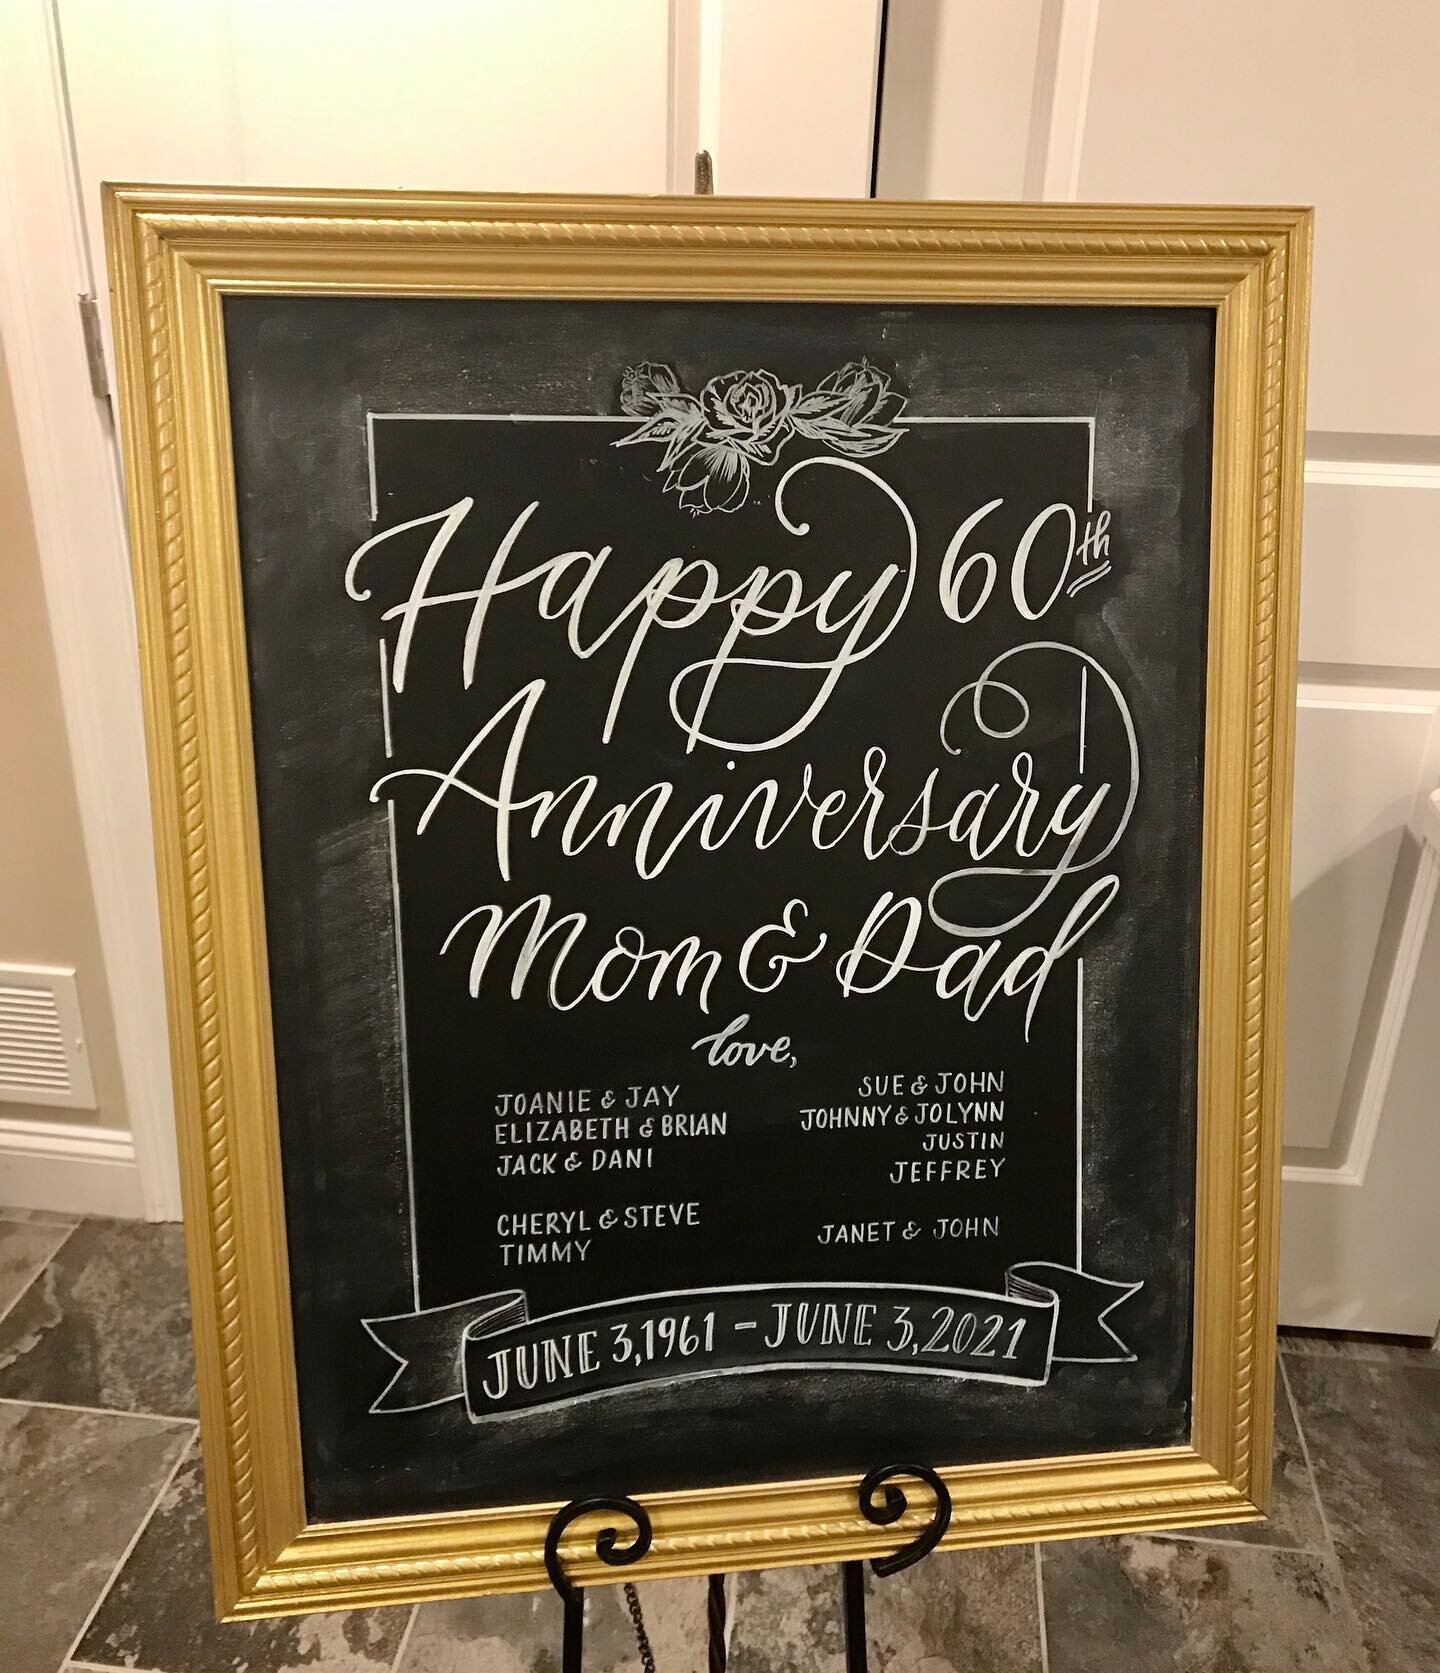 Had the pleasure of making this sign for a 60th Wedding Anniversary! Such an incredible accomplishment 💕
.
Gold framed chalkboards available for rent ✨ a little rustic &amp; a little fancy ✨
.
#weddingrentals #customrentals #weddingchalkboardsigns #